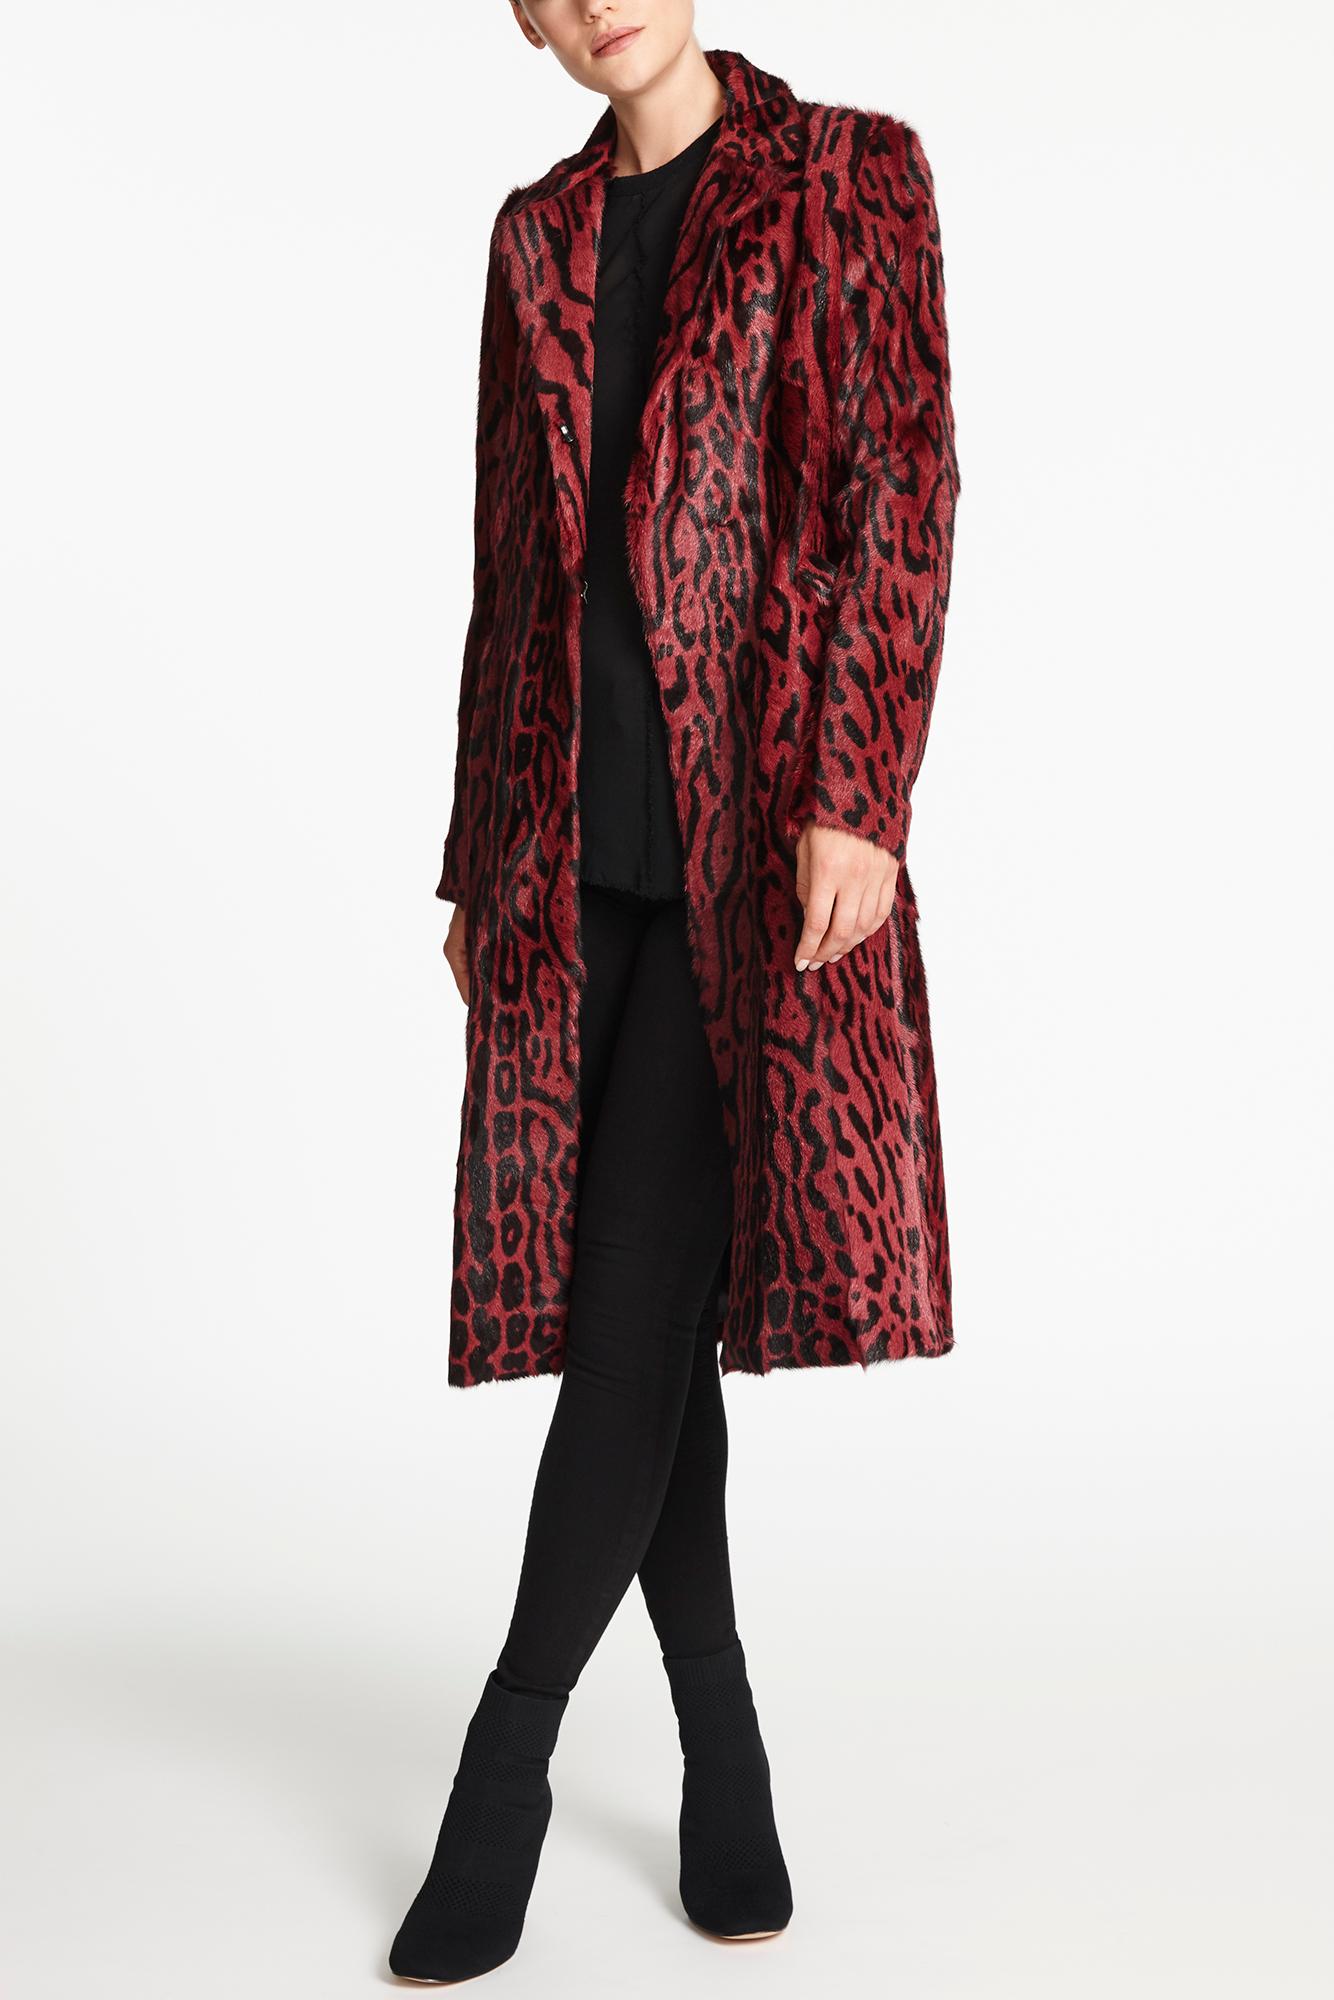 The longline Leopard print coat is Verheyen London’s wardrobe “must have” for effortless style and glamour.

Crafted and dyed in Italy this tailored statement coat will take you from day to evening.

PRODUCT DETAILS

Long Line Coat in Ruby Leopard